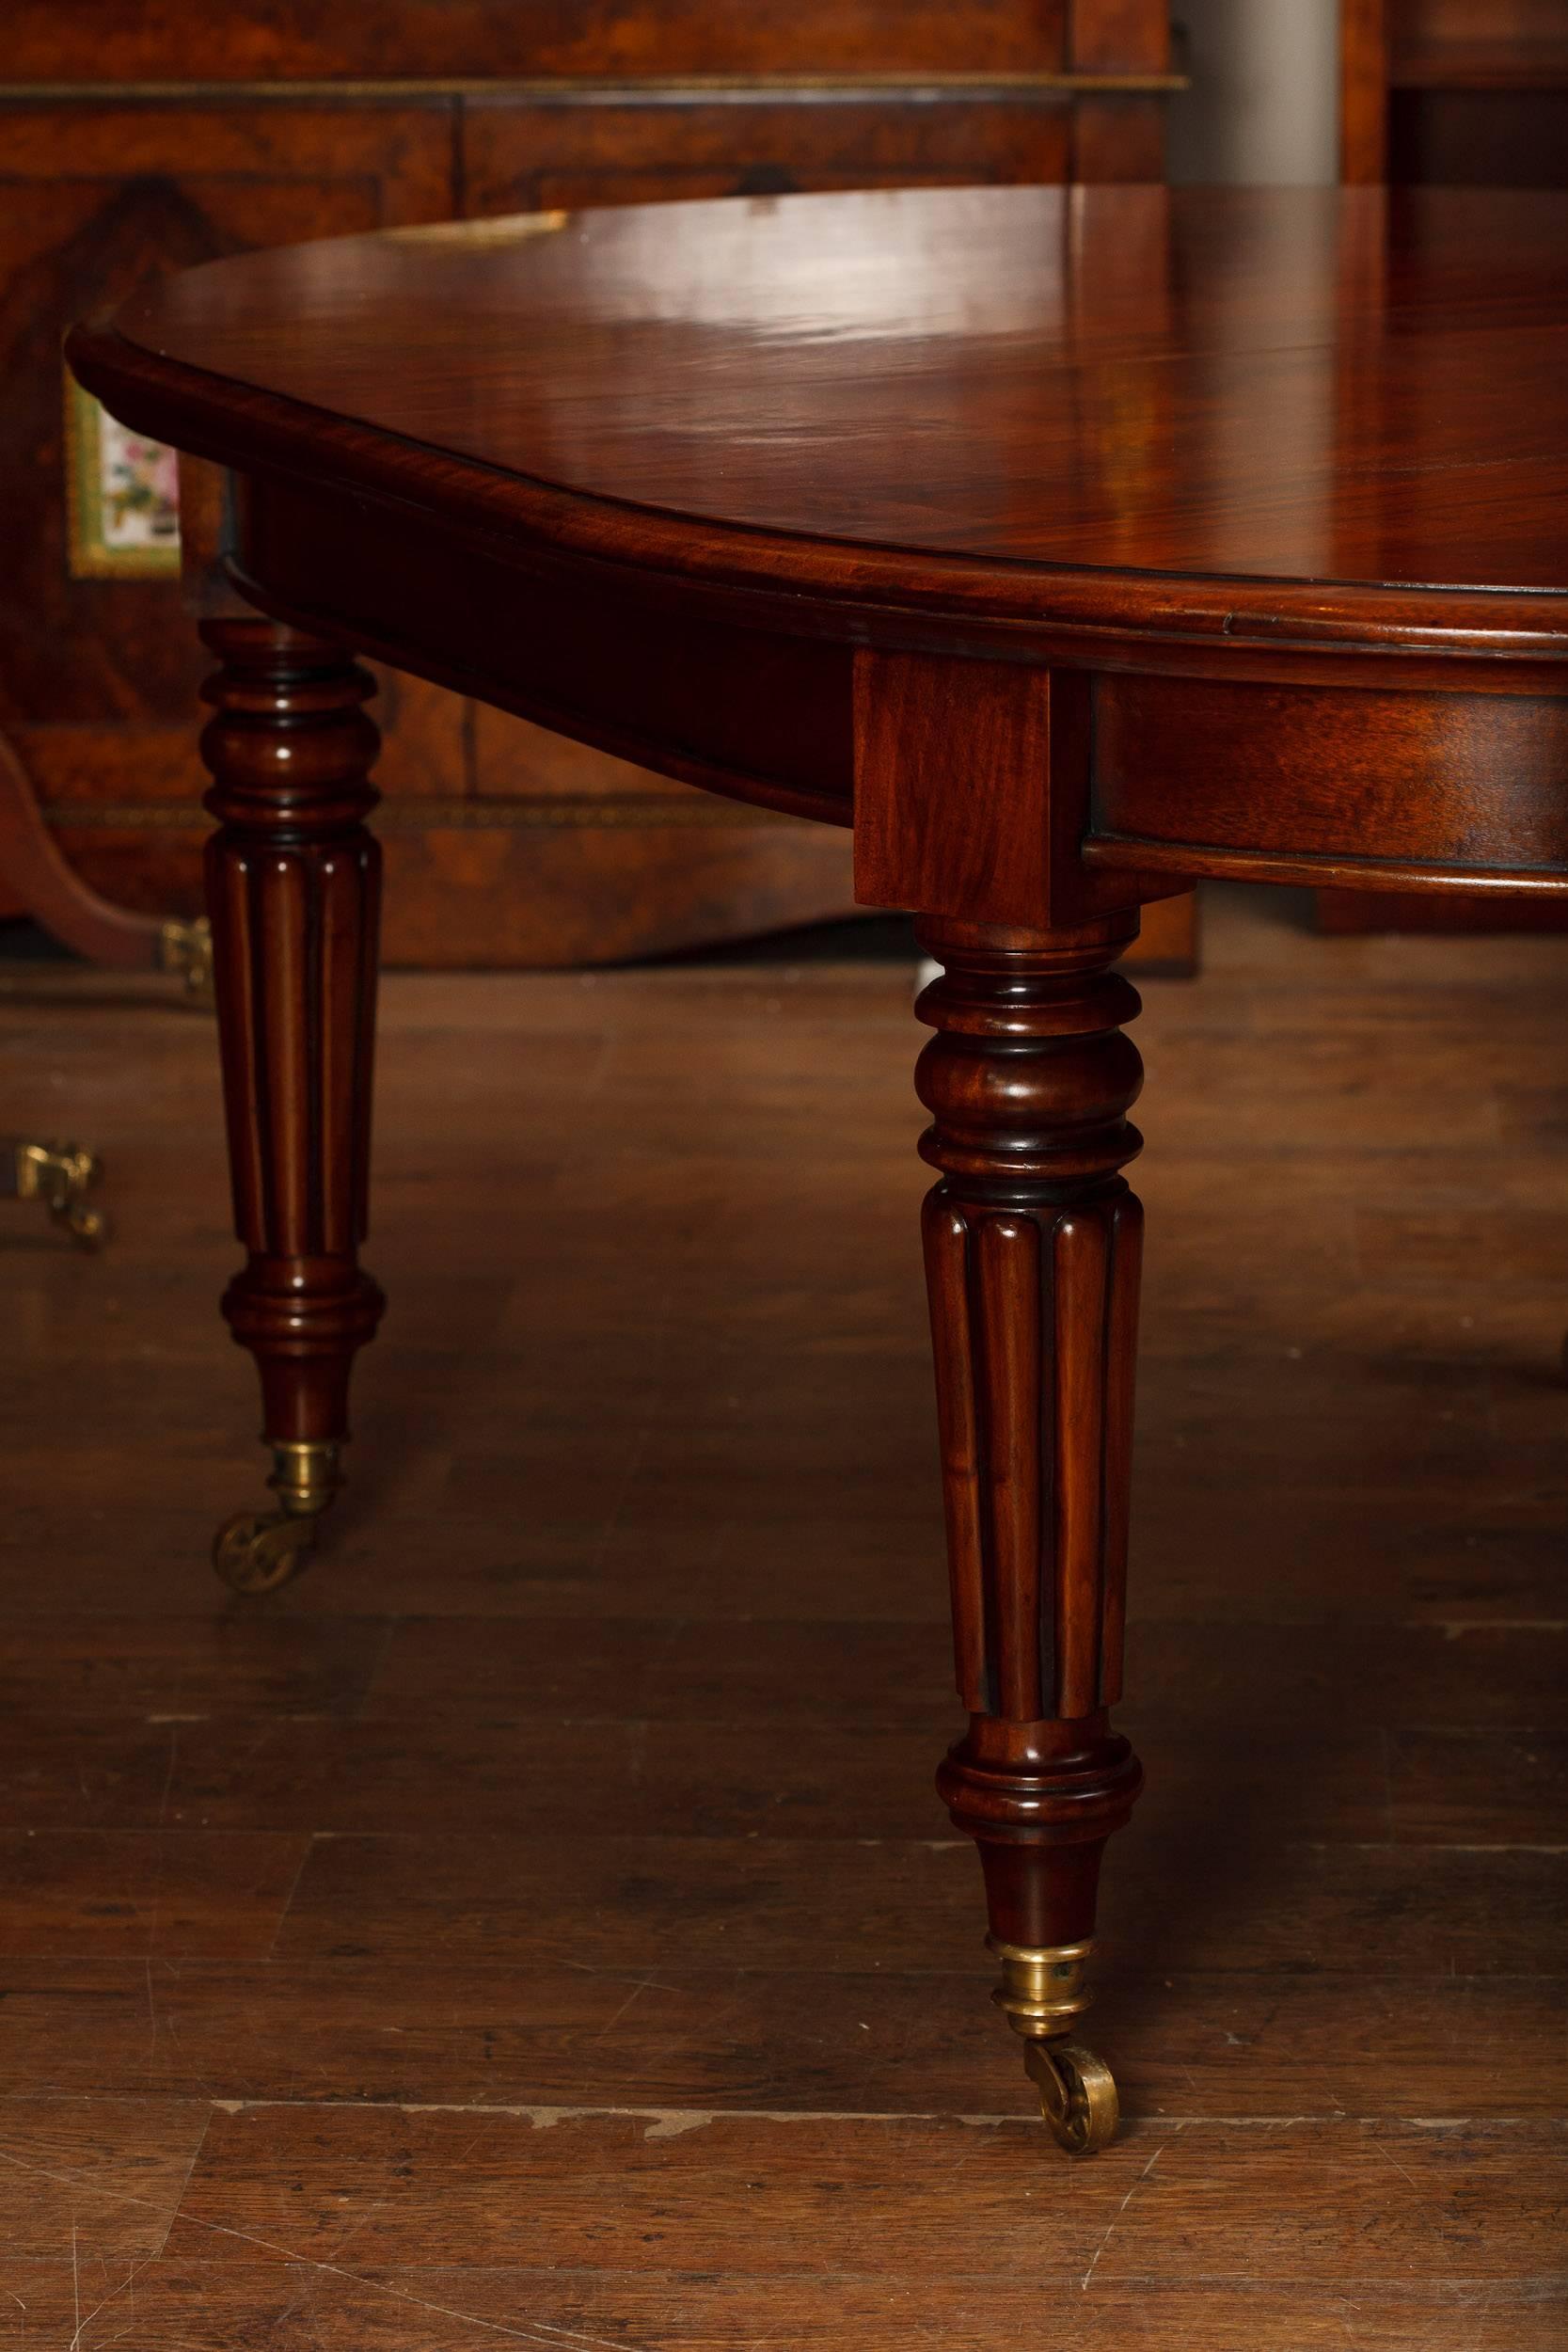 Come view this in our Herts showroom, just 25 minutes north of London.
Stunning Victorian style mahogany dining table.
Table has two leaves so this table can be various sizes.
Table has oval ends and reduces to an oval ended oblong shape with no